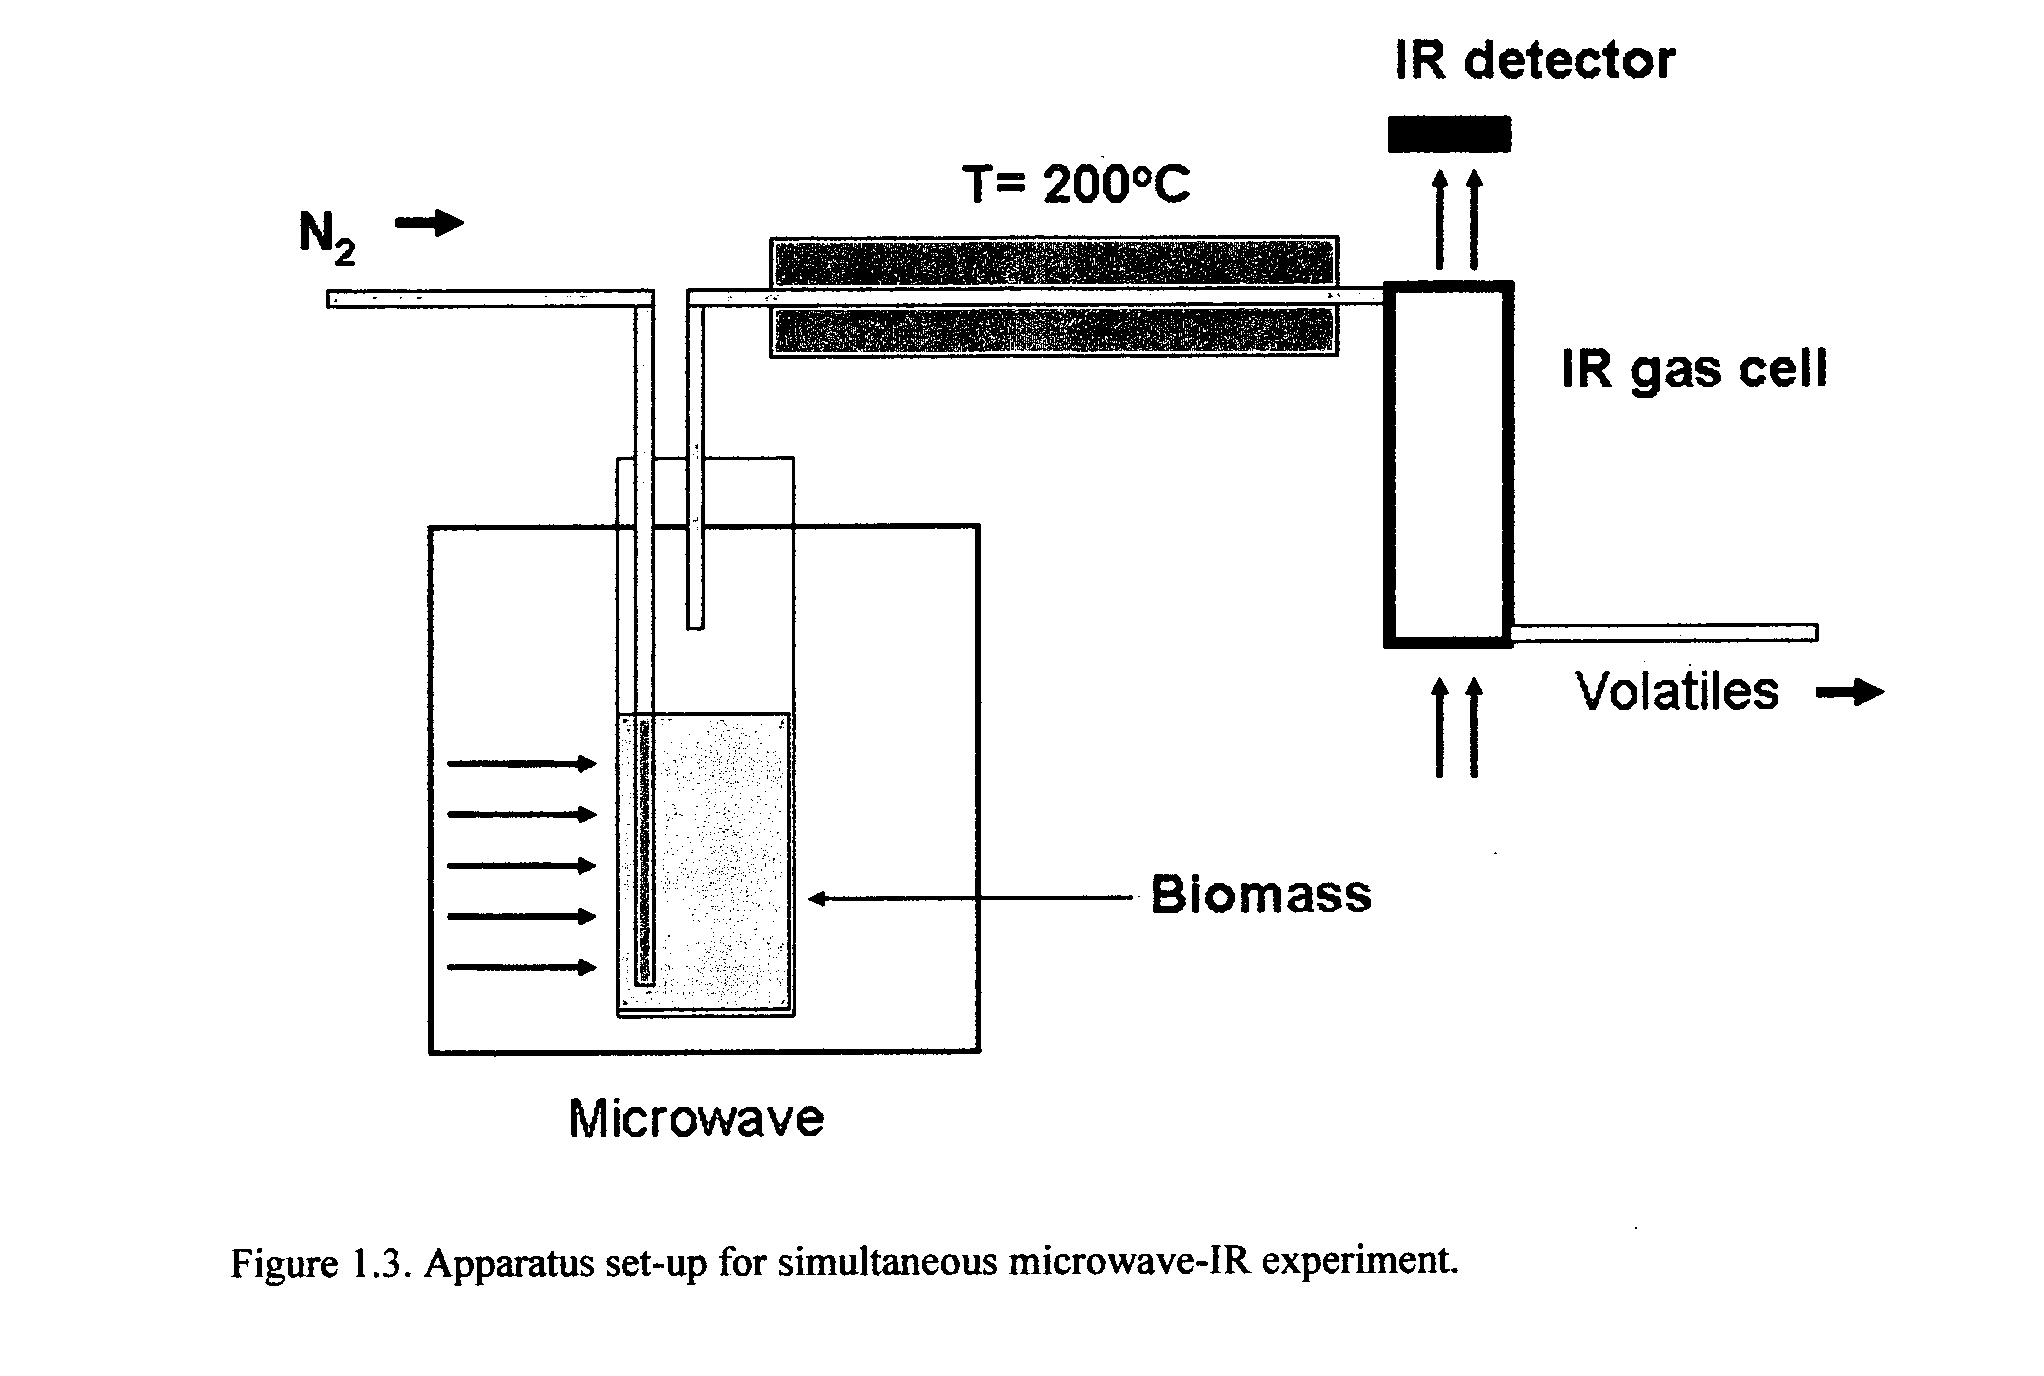 Microwave torrefaction of biomass